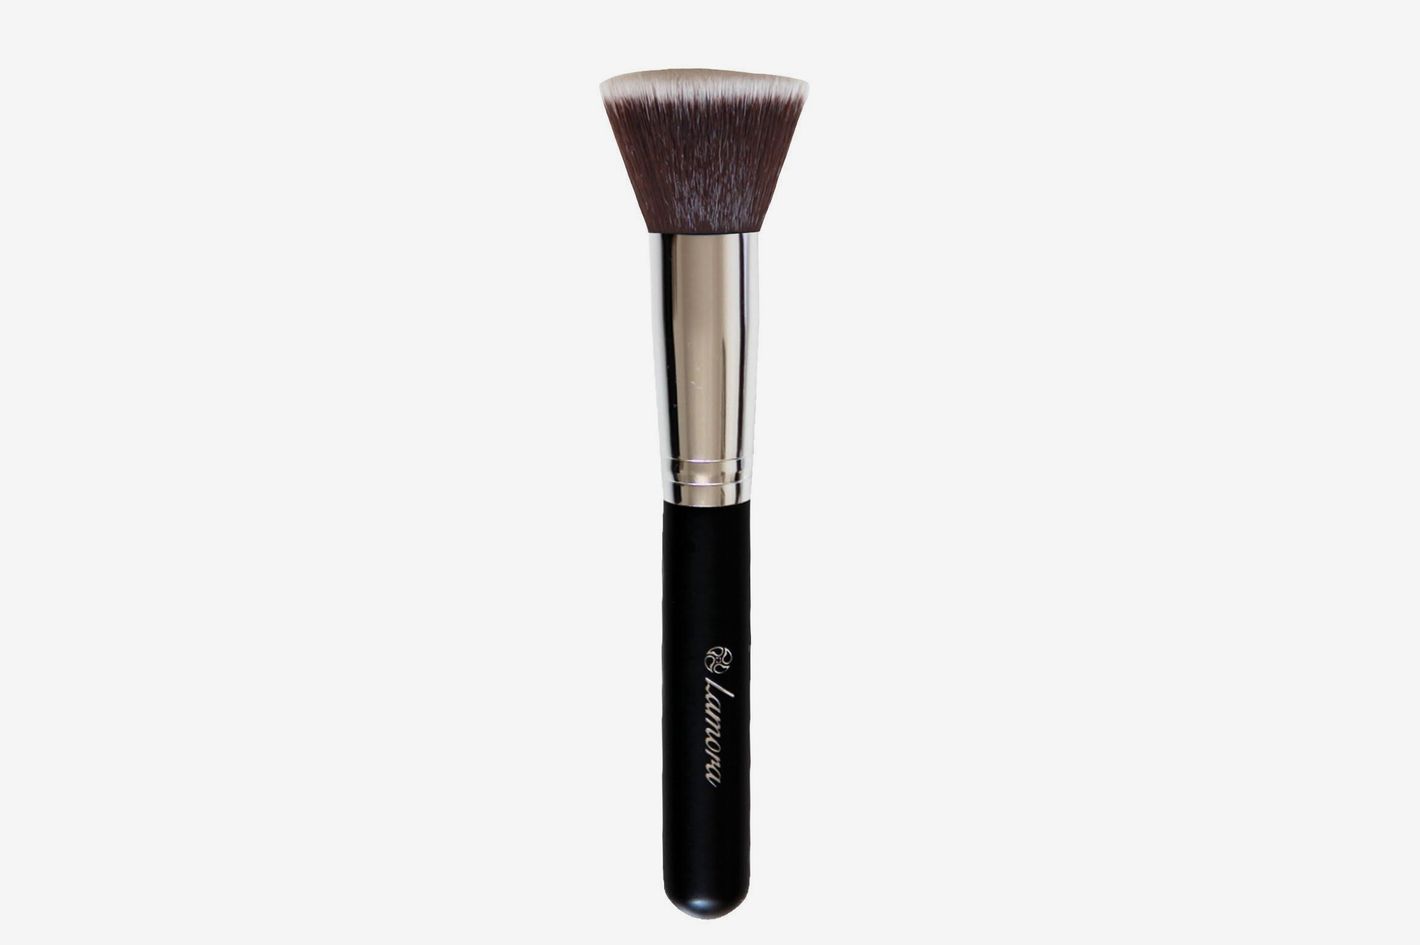 The Best Makeup Brushes and Makeup Brush Sets 2018